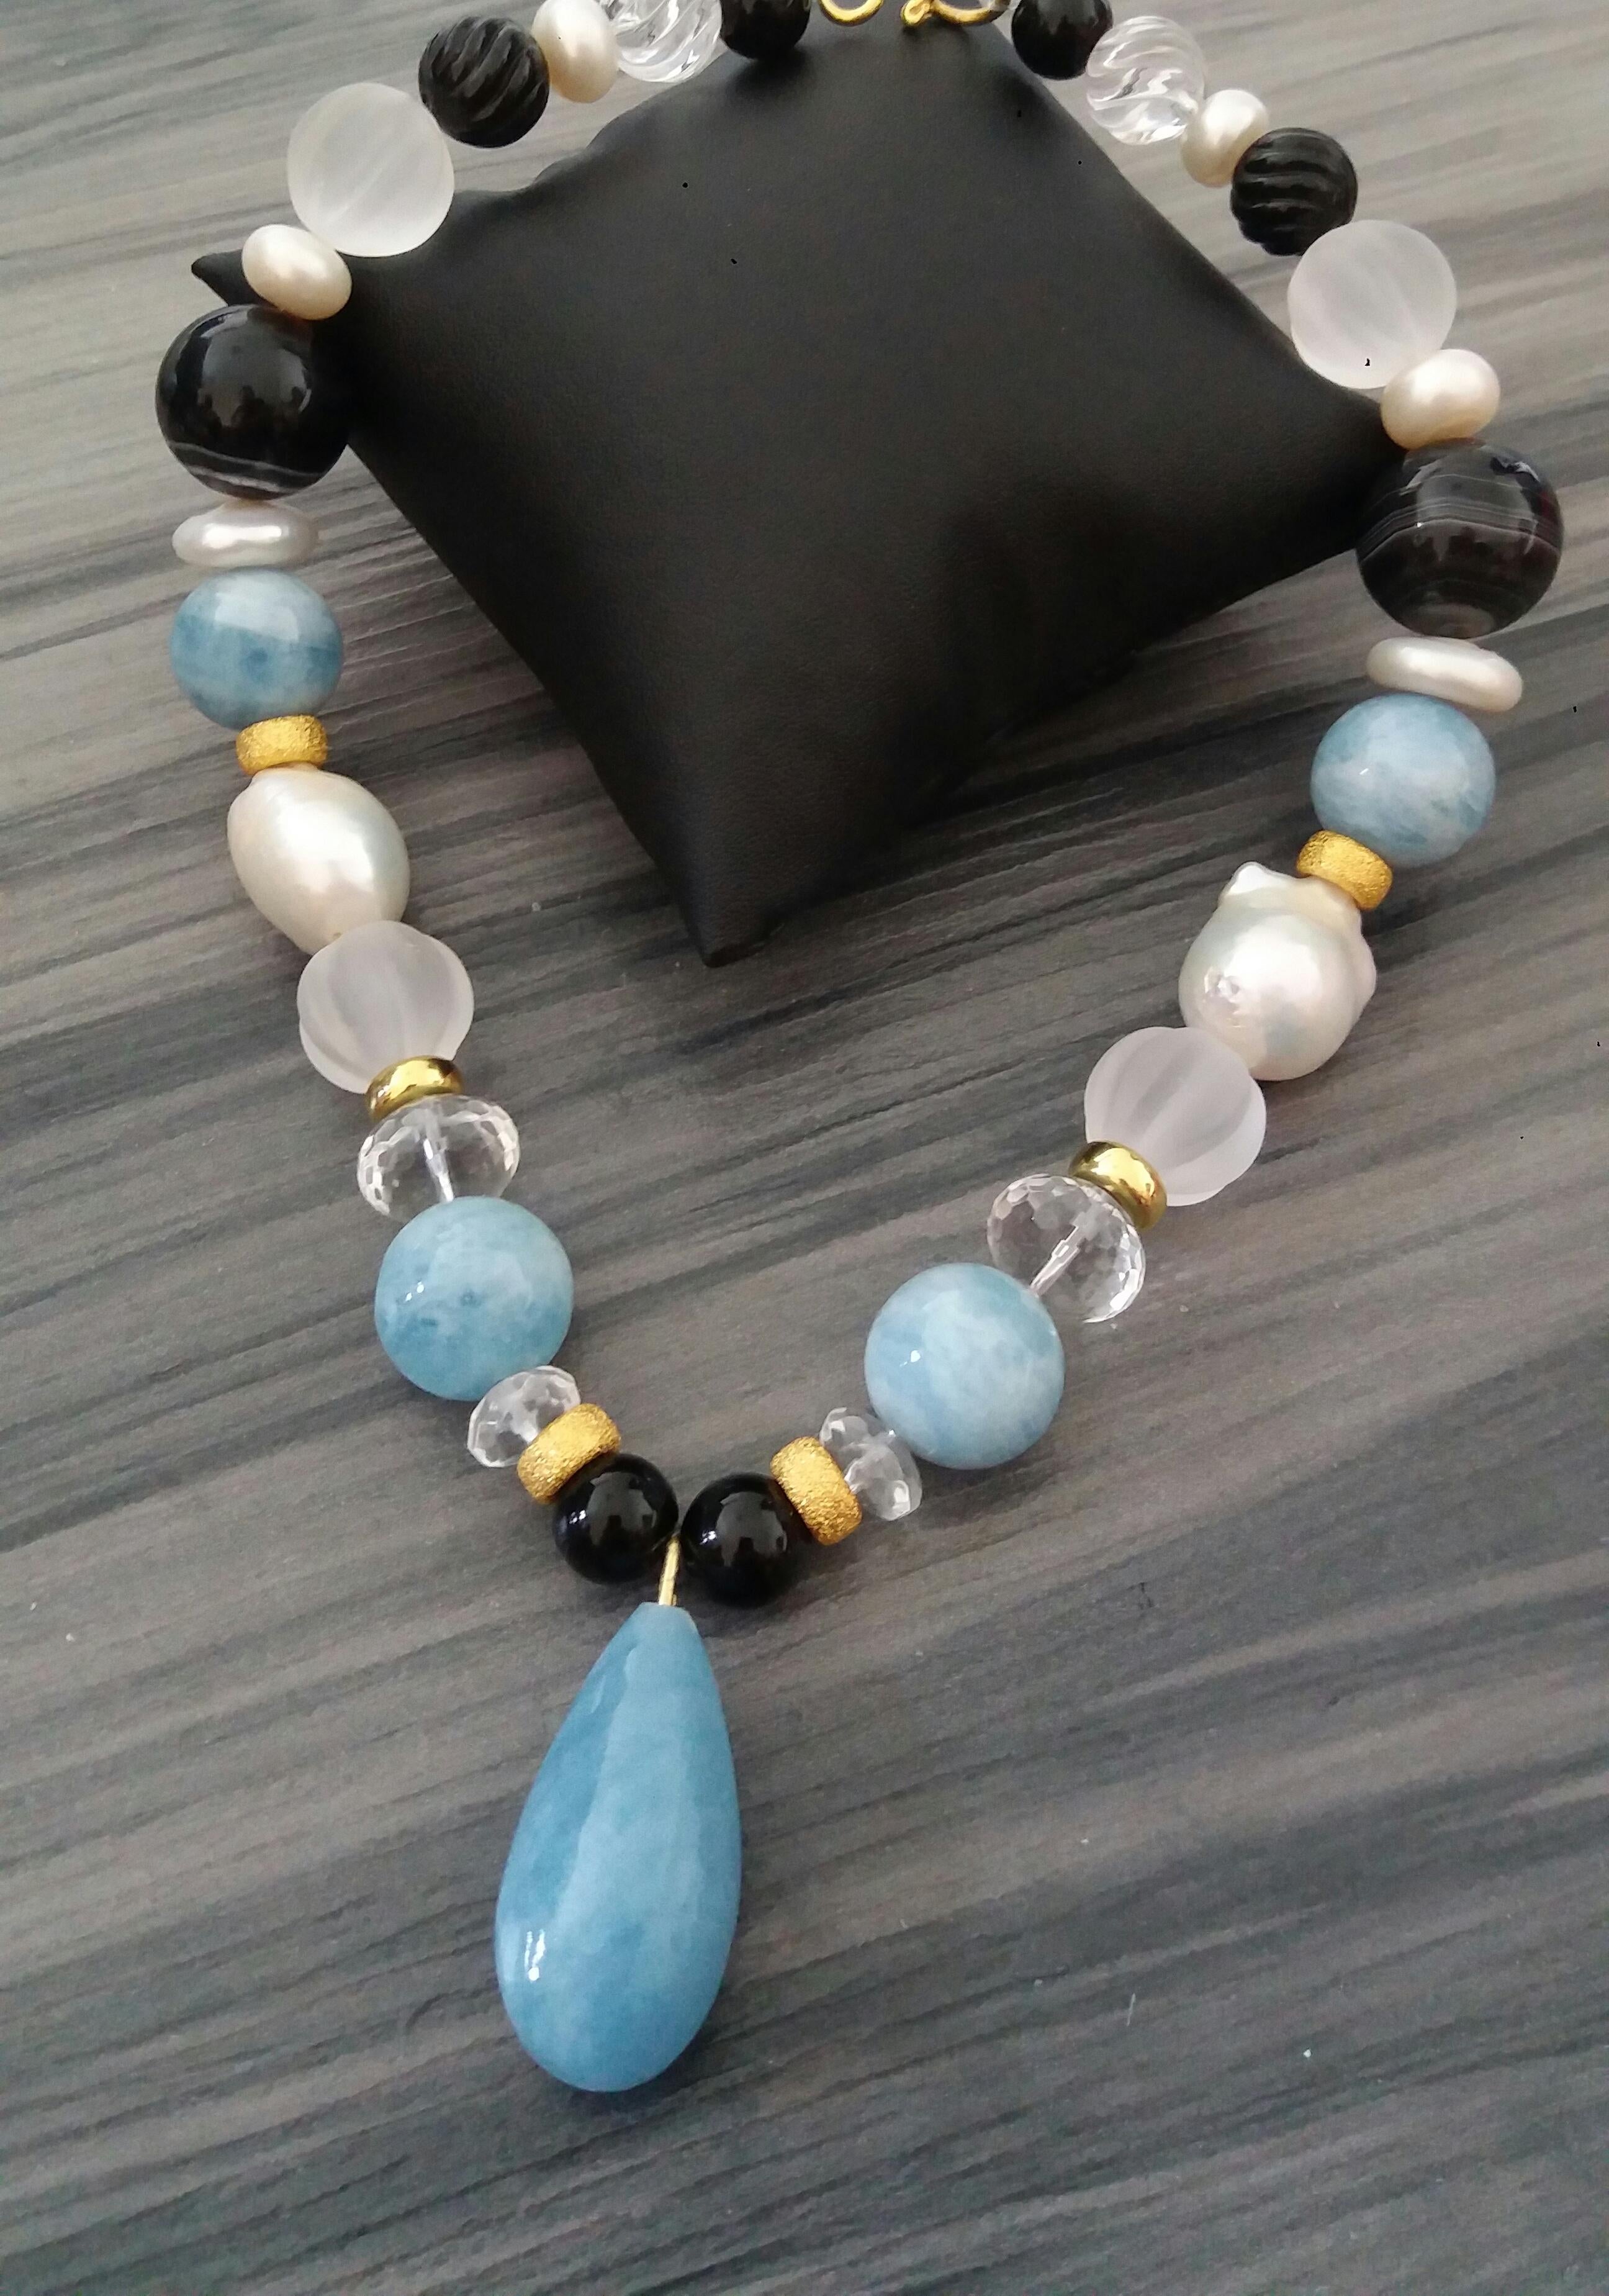 Aquamarine Beads And Pendant Baroque Pearls Quartz Onyx Yellow Gold Necklace For Sale 5